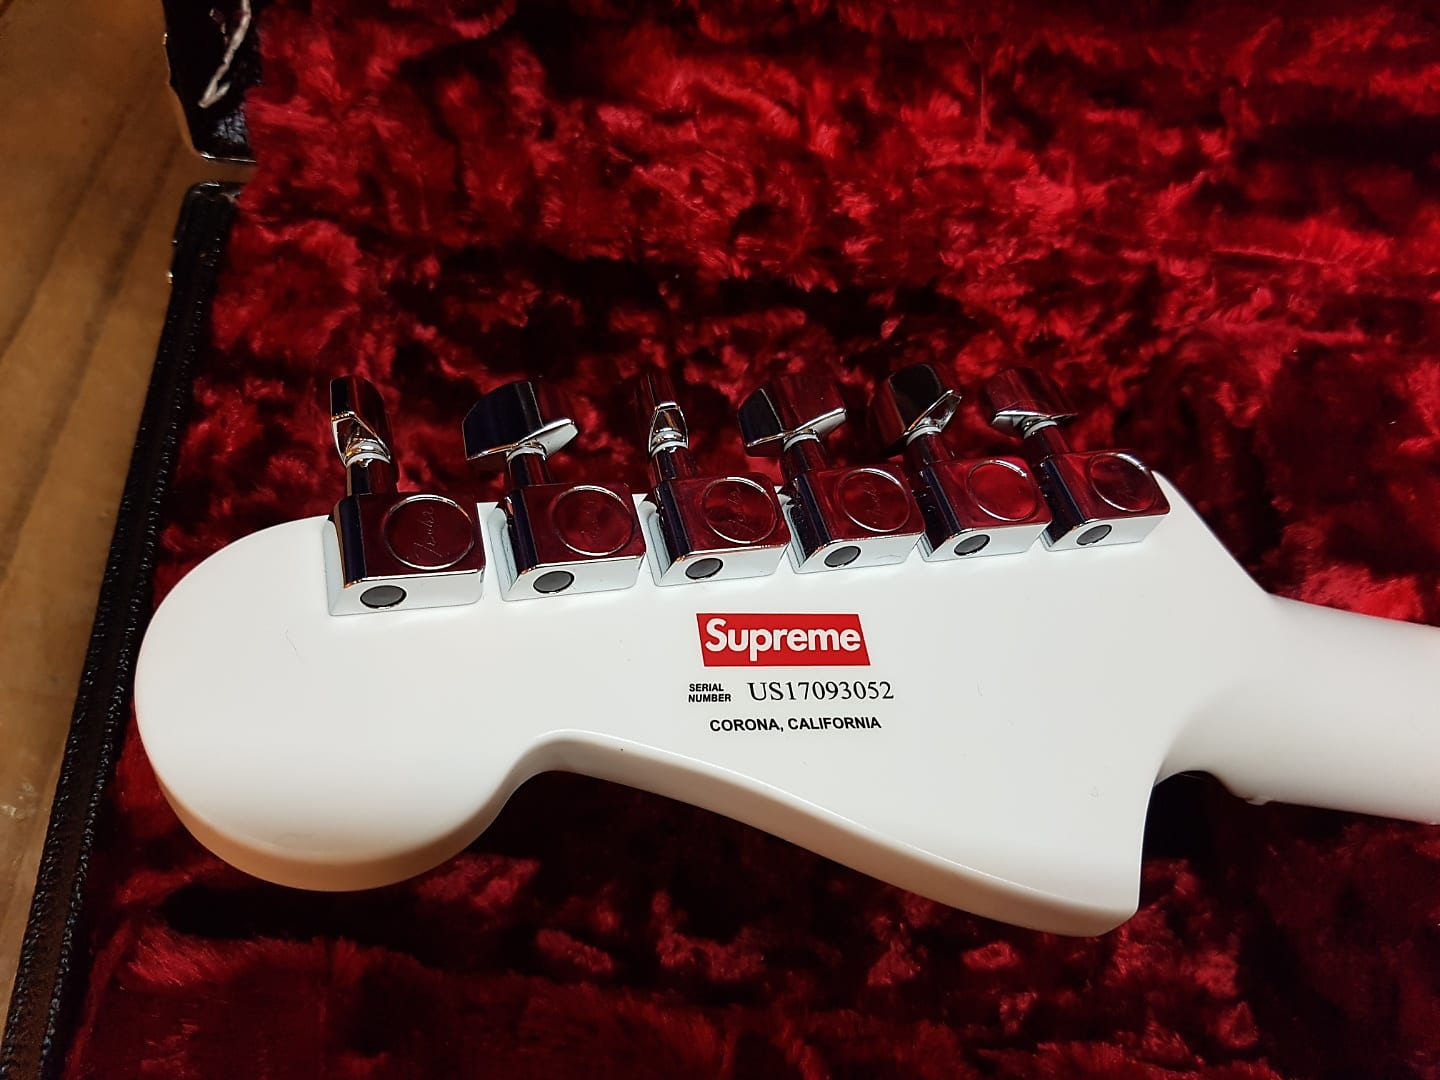 This is the headstock of the all-white Stratocaster. If only it didn't have the darn red "Supreme" logo between the picks, which diminishes the guitar's beauty